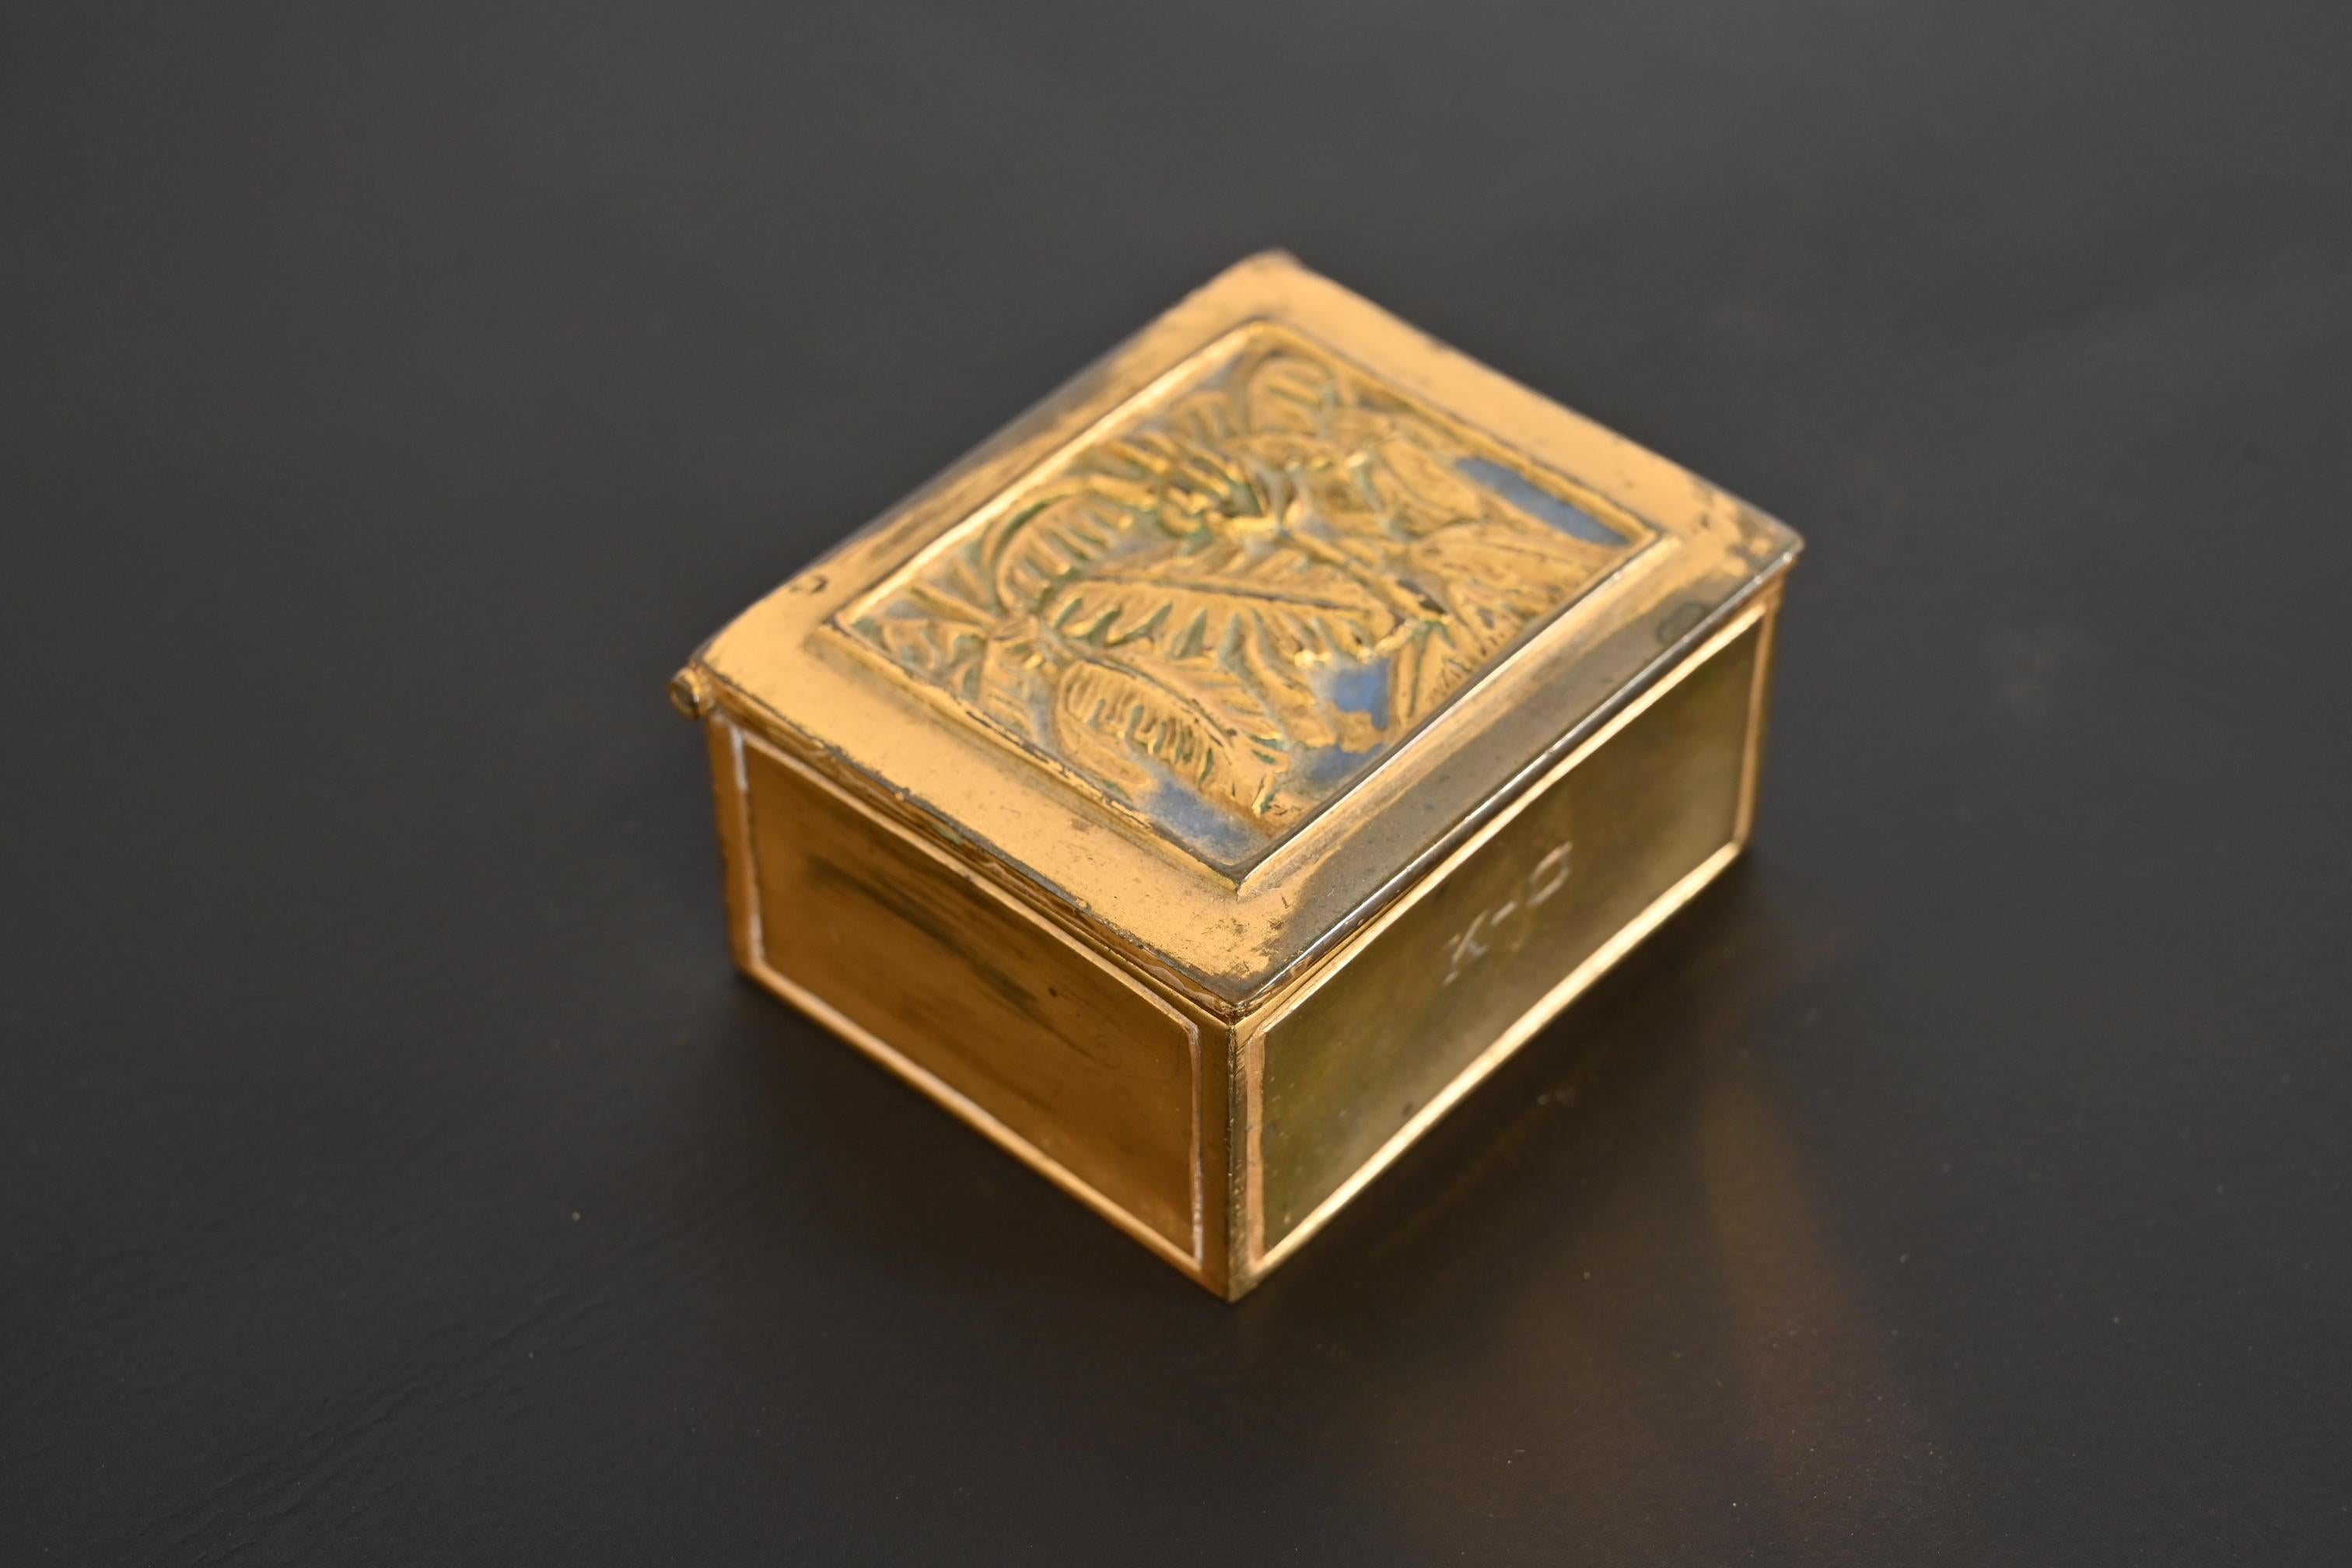 Tiffany Studios New York Bookmark Bronze Doré Stamp Box In Good Condition For Sale In South Bend, IN